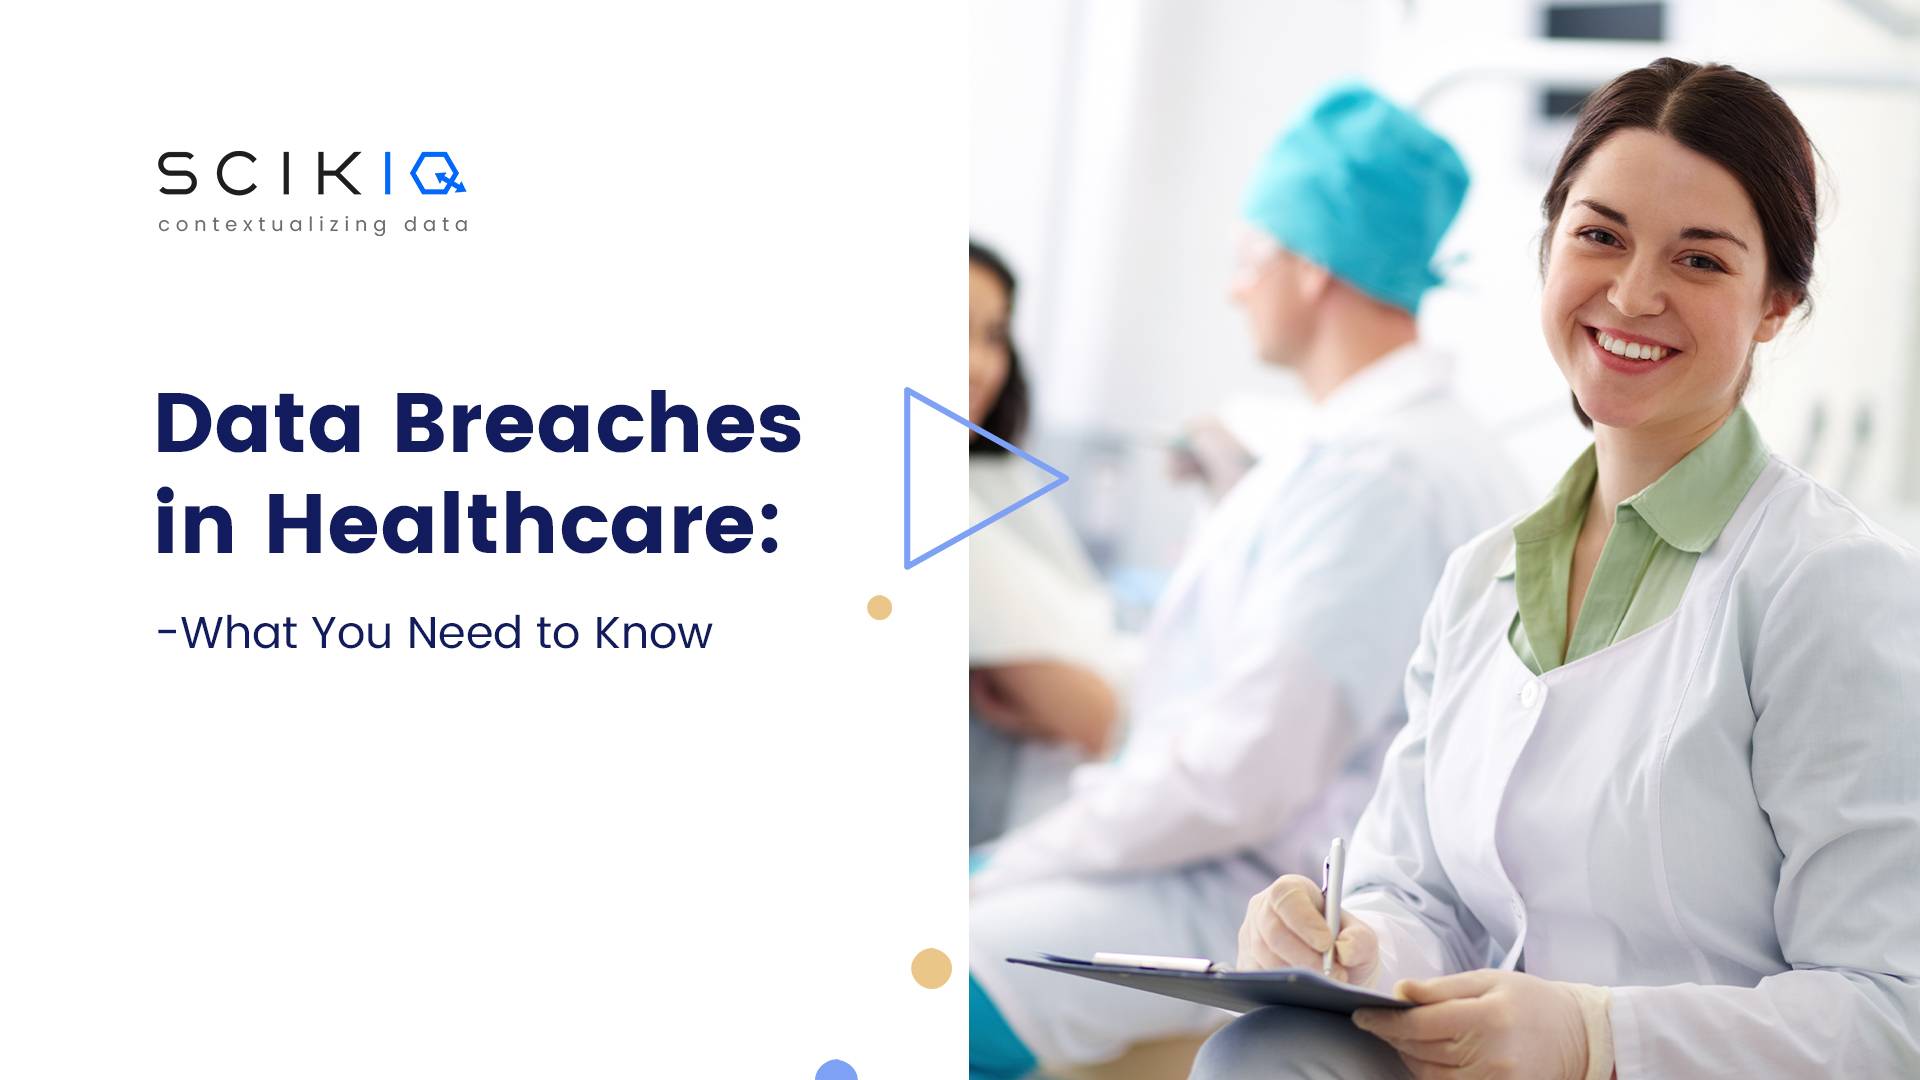 Data Breaches and Data protection in Healthcare industry